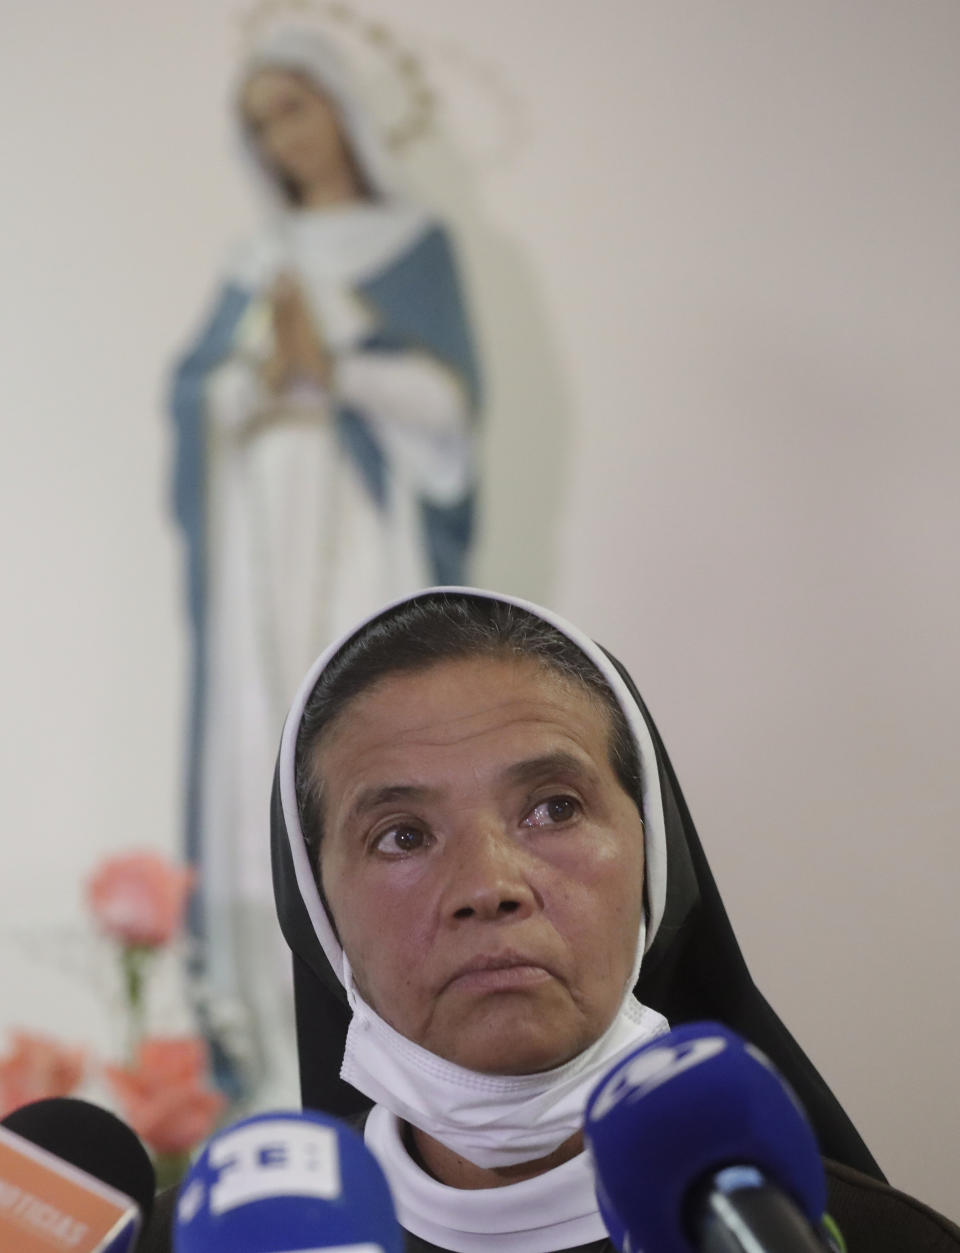 FILE — Colombian nun Gloria Cecilia Narvaez, who was held captive for nearly five years by al-Qaida-linked militants, listens to a question during a press conference in Bogota, Colombia, in this Friday, Nov. 19, 2021 file photo. Pope Francis authorized spending up to 1 million euro to free Narvaez, Cardinal Angelo Becciu testified at the Vatican's big financial fraud trial Thursday, May 5, 2022, revealing previously top secret negotiations that Francis authorized to hire a British security and intelligence firm to find the nun and pay for her liberation. (AP Photo/Ivan Valencia)